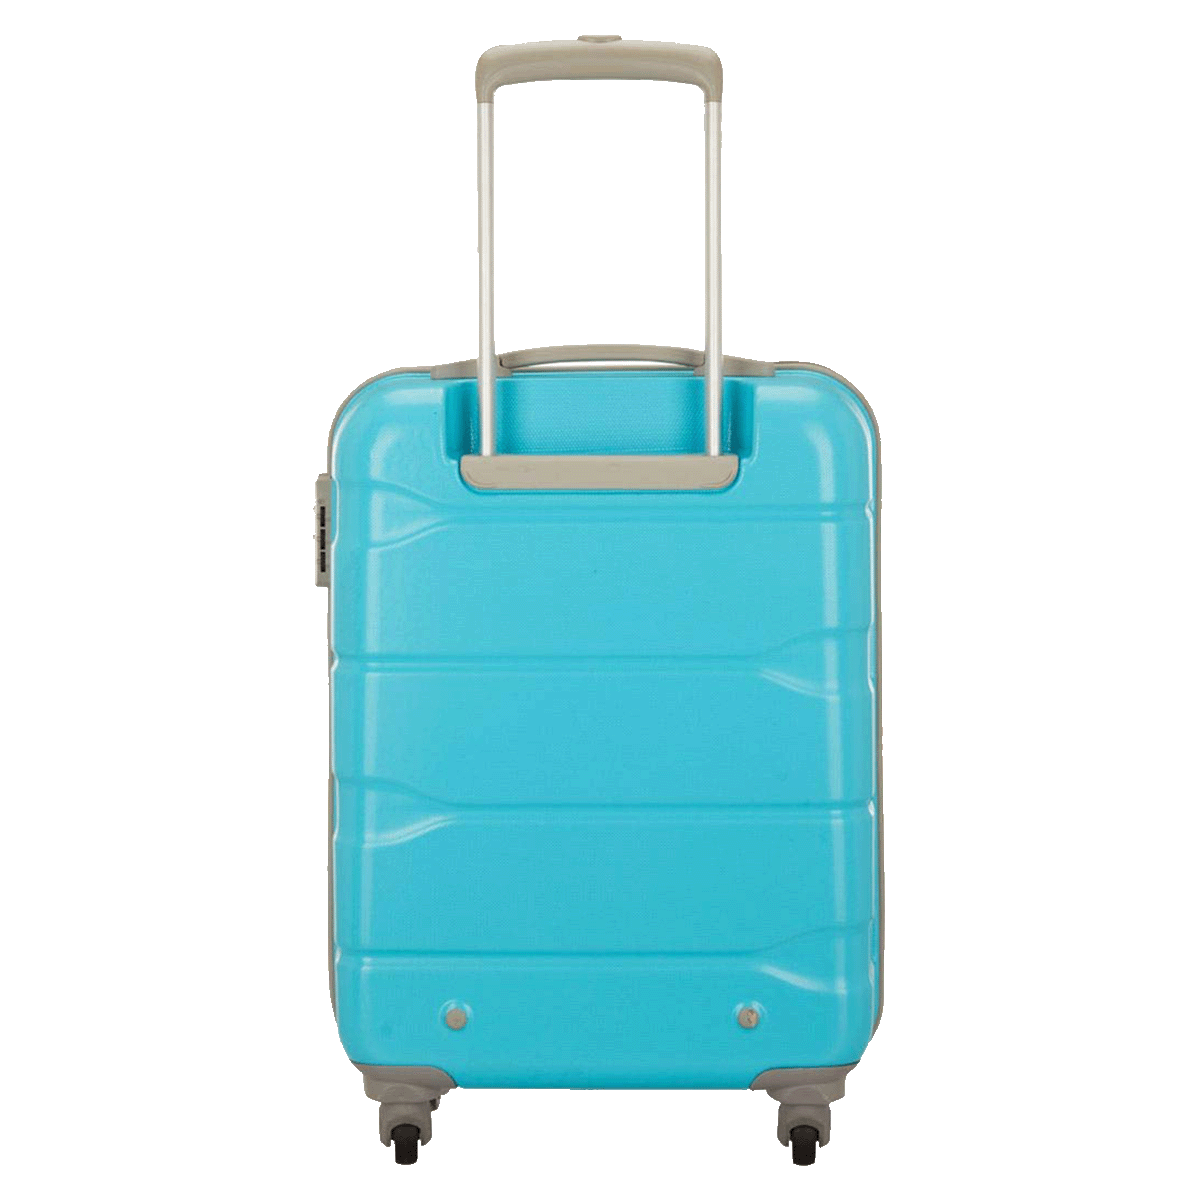 Buy Trolley Bag for Travel Polyester 24 inch Softsided Cabin  Checkin Luggage  Bag Suitcase EGrey at Amazonin